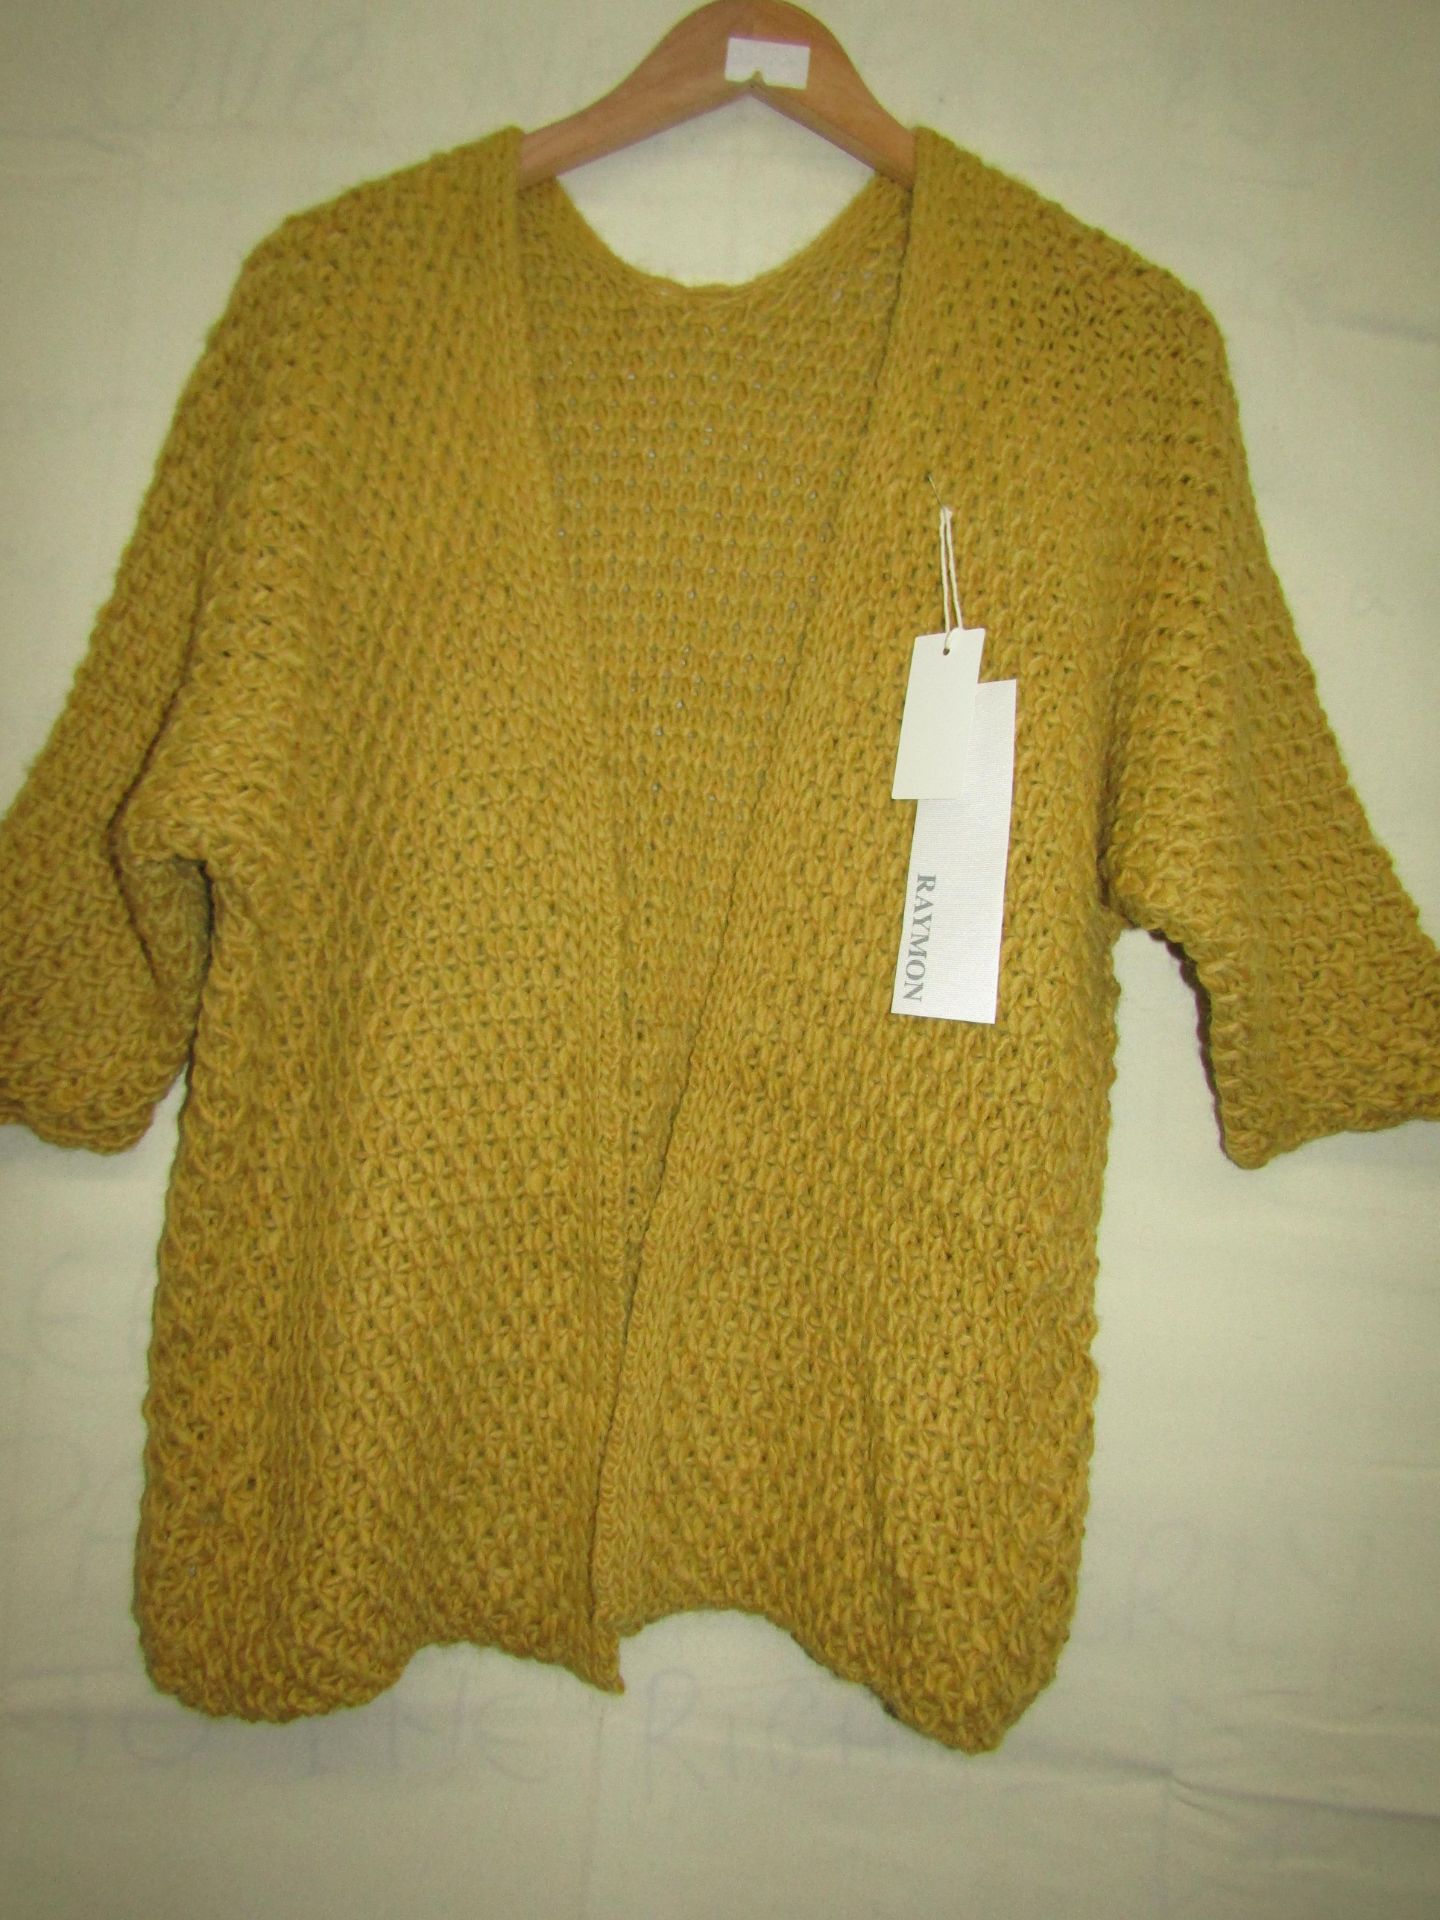 Raymon Ladies Open Fronted 3/4 Length Sleeve Cardigan Mustard Colour Approx Size M New & Packaged